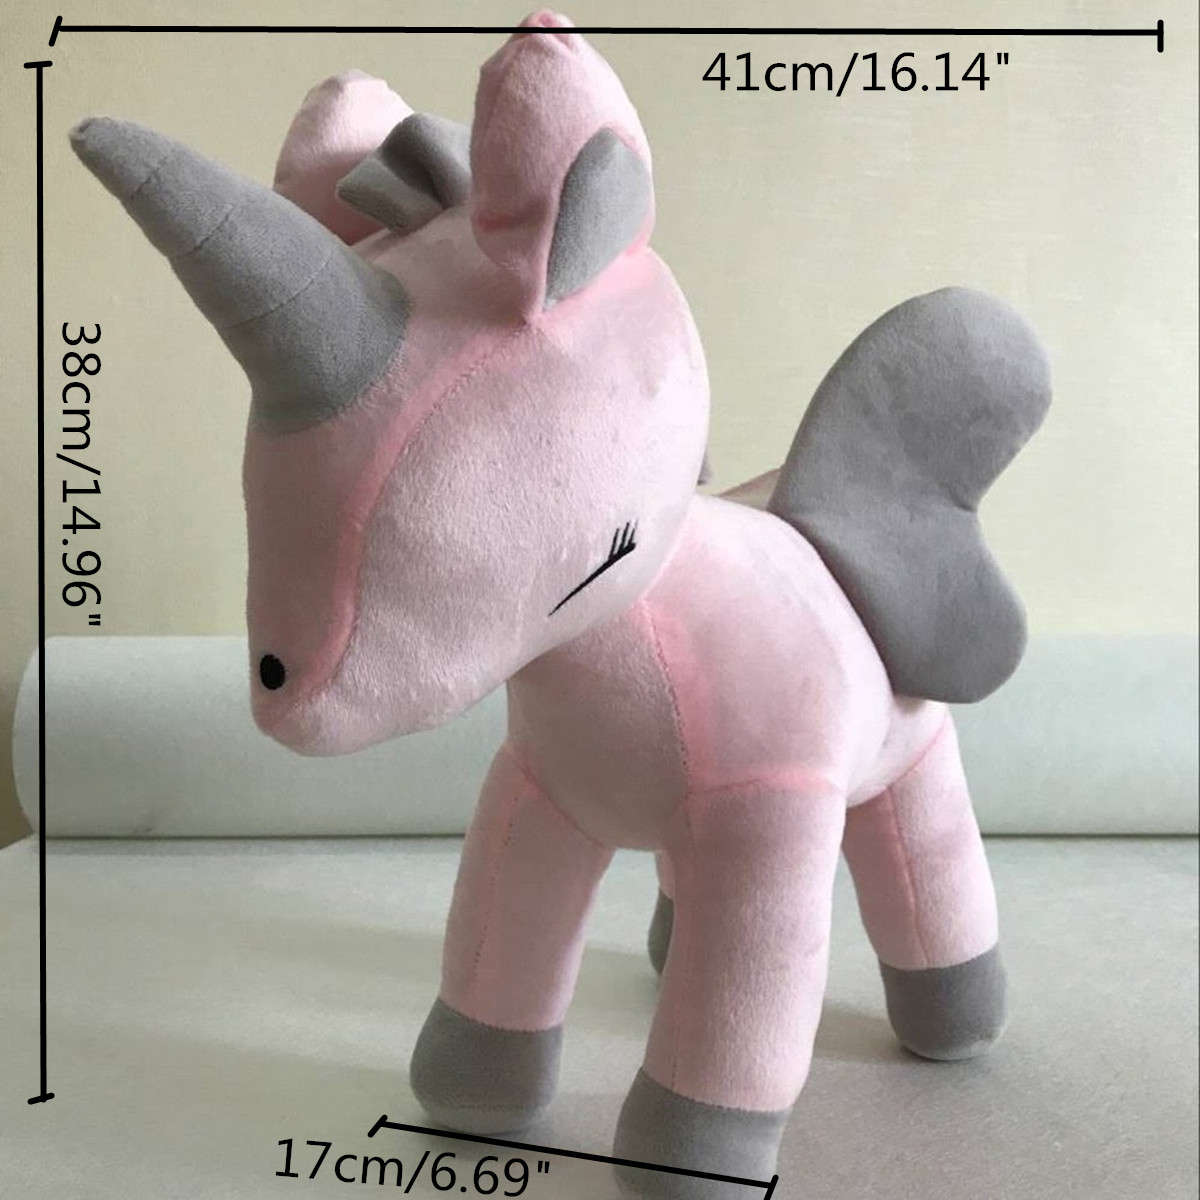 16-Inches-Soft-Giant-Unicorn-Stuffed-Plush-Toy-Animal-Doll-Children-Gifts-Photo-Props-Gift-1299365-9